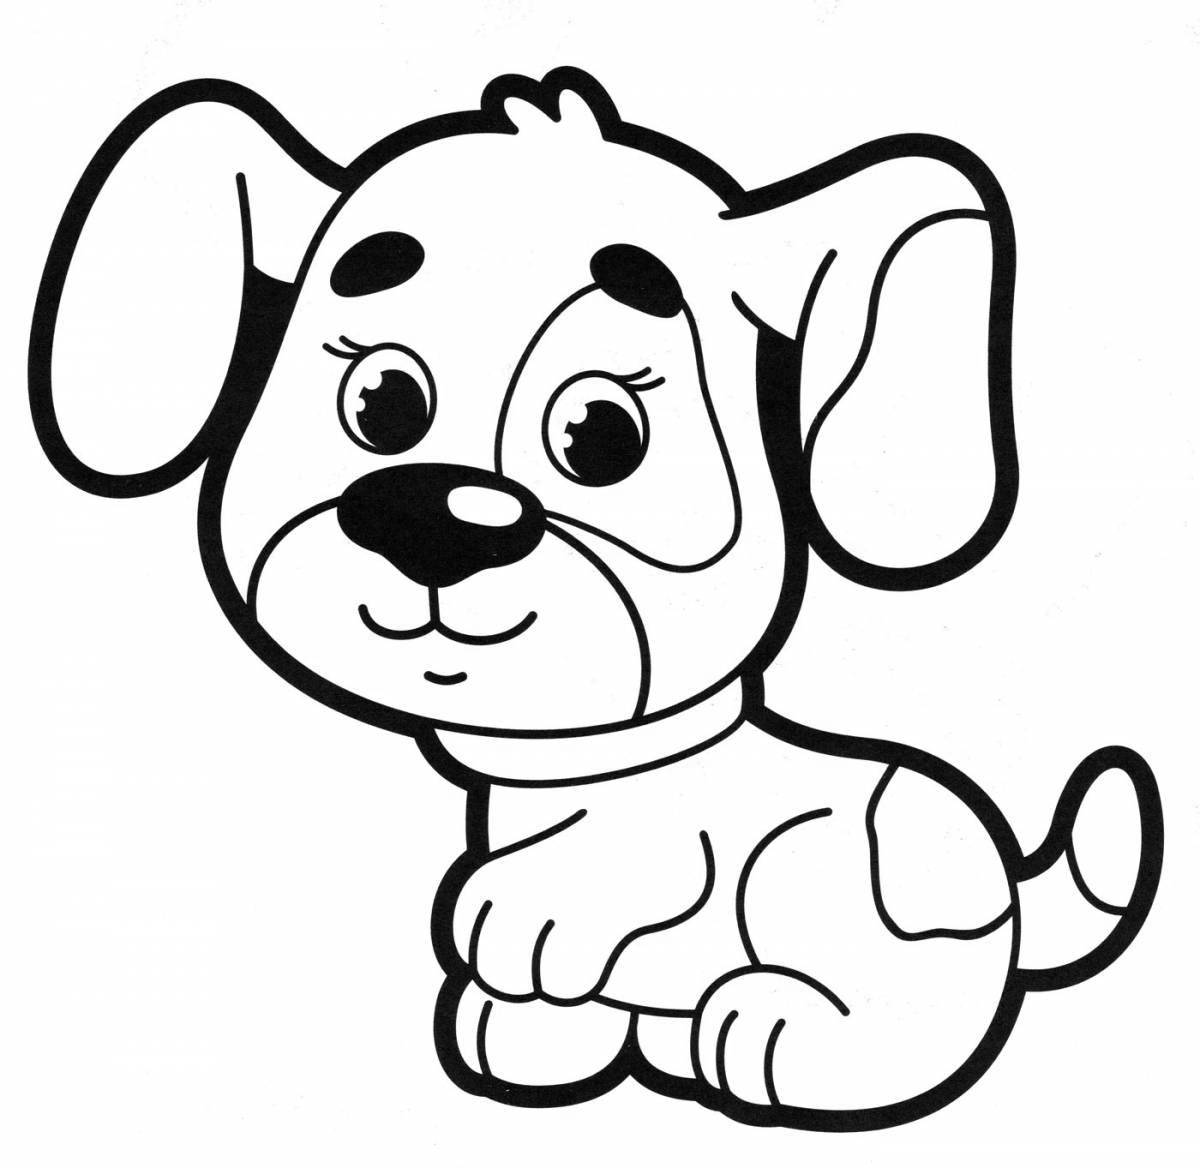 Curious puppies coloring pages